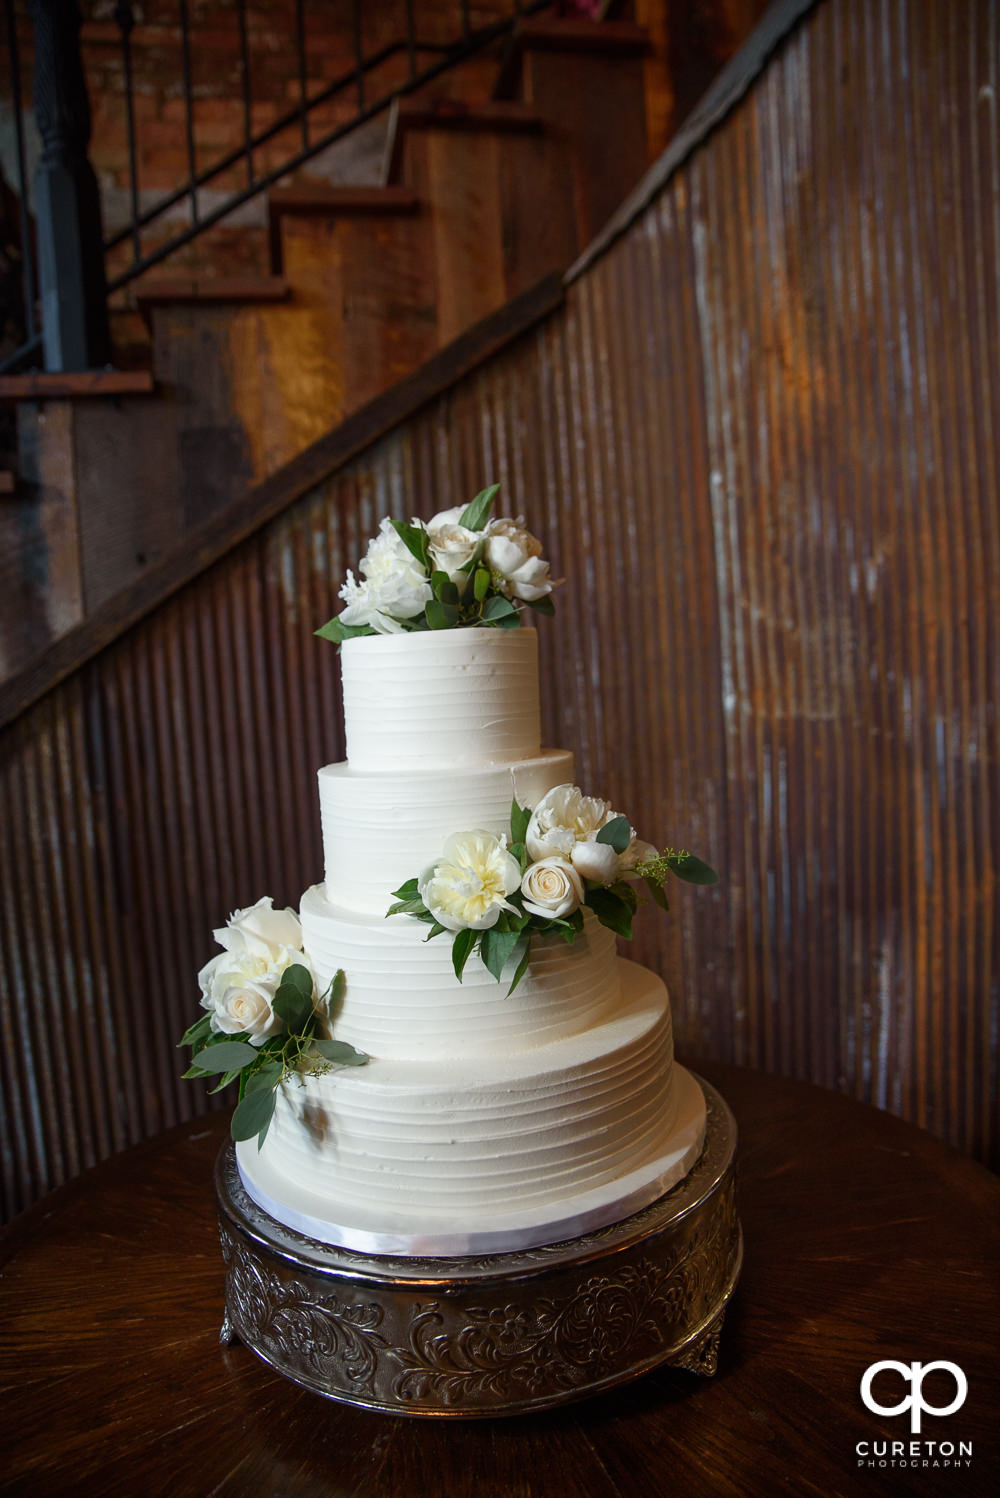 Wedding cake by Couture Cakes in Greenville.